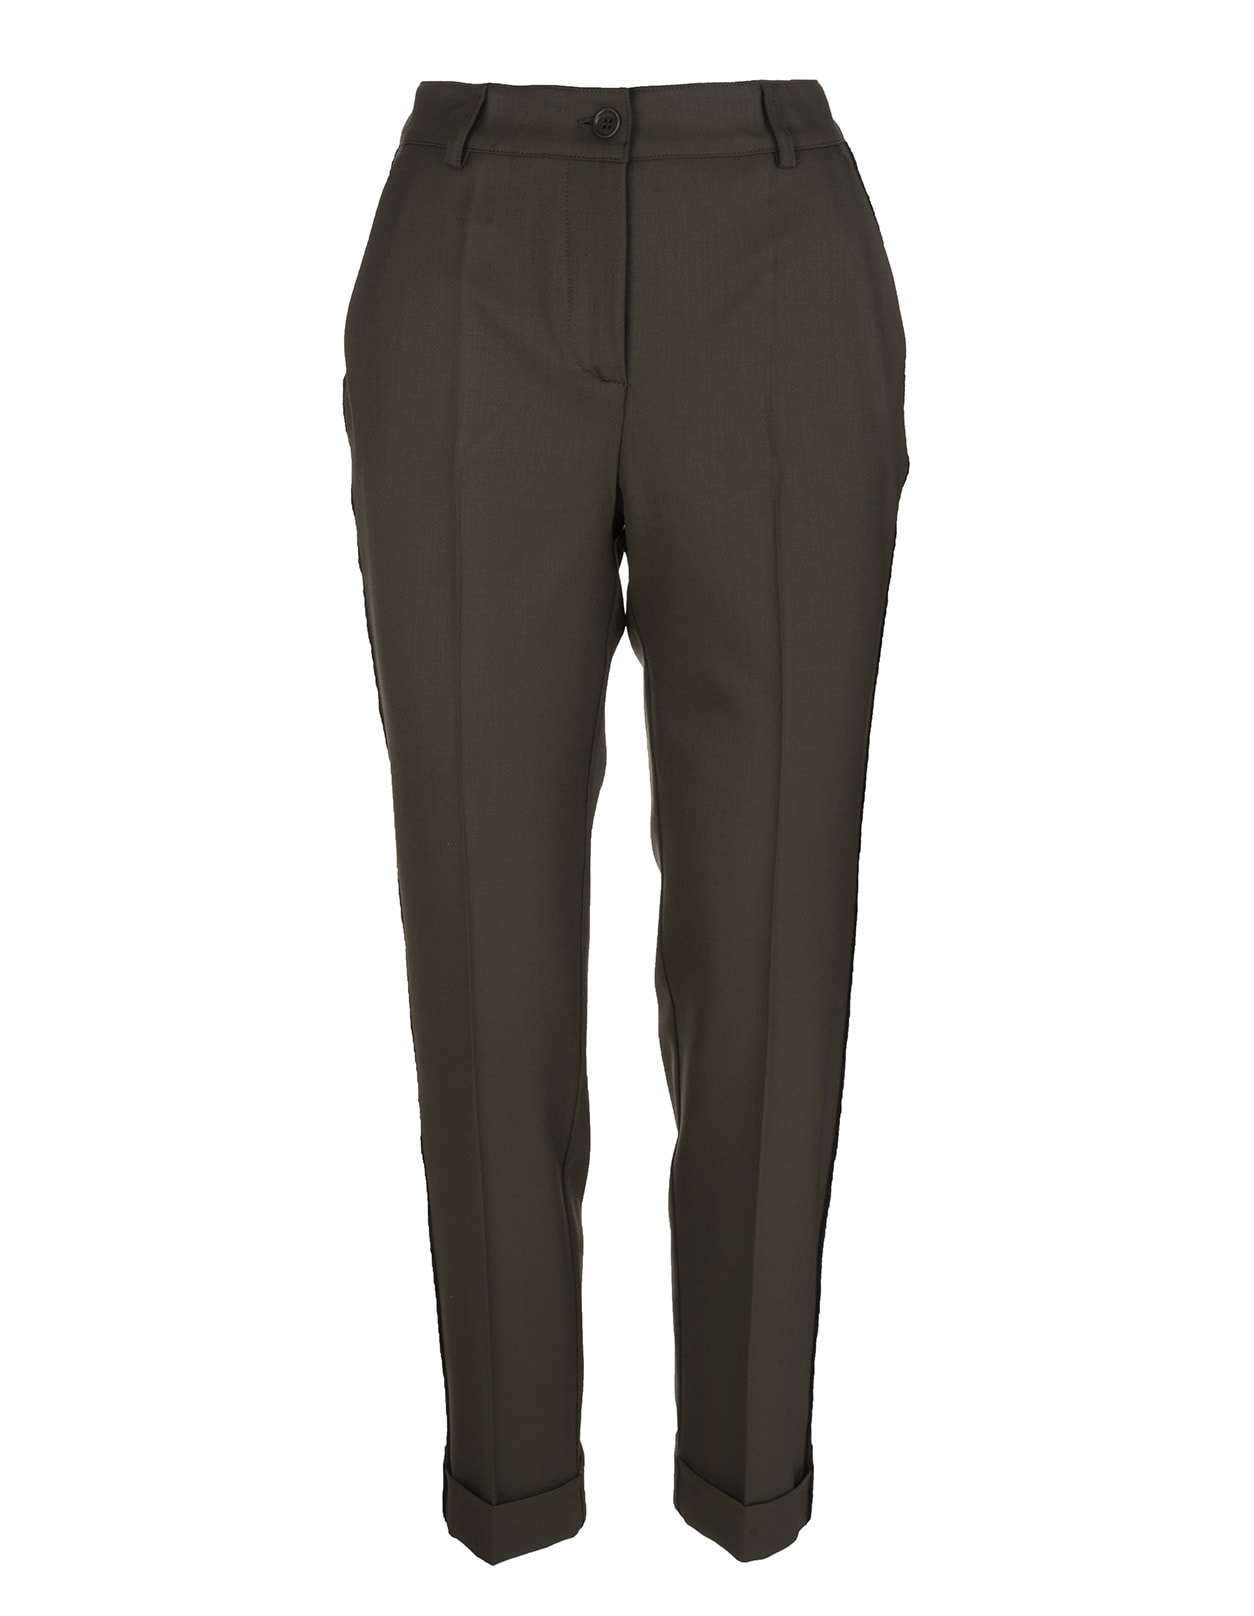 Parosh Woman Liliuxy Trousers In Military Green Wool With Black Fringed Side Bands